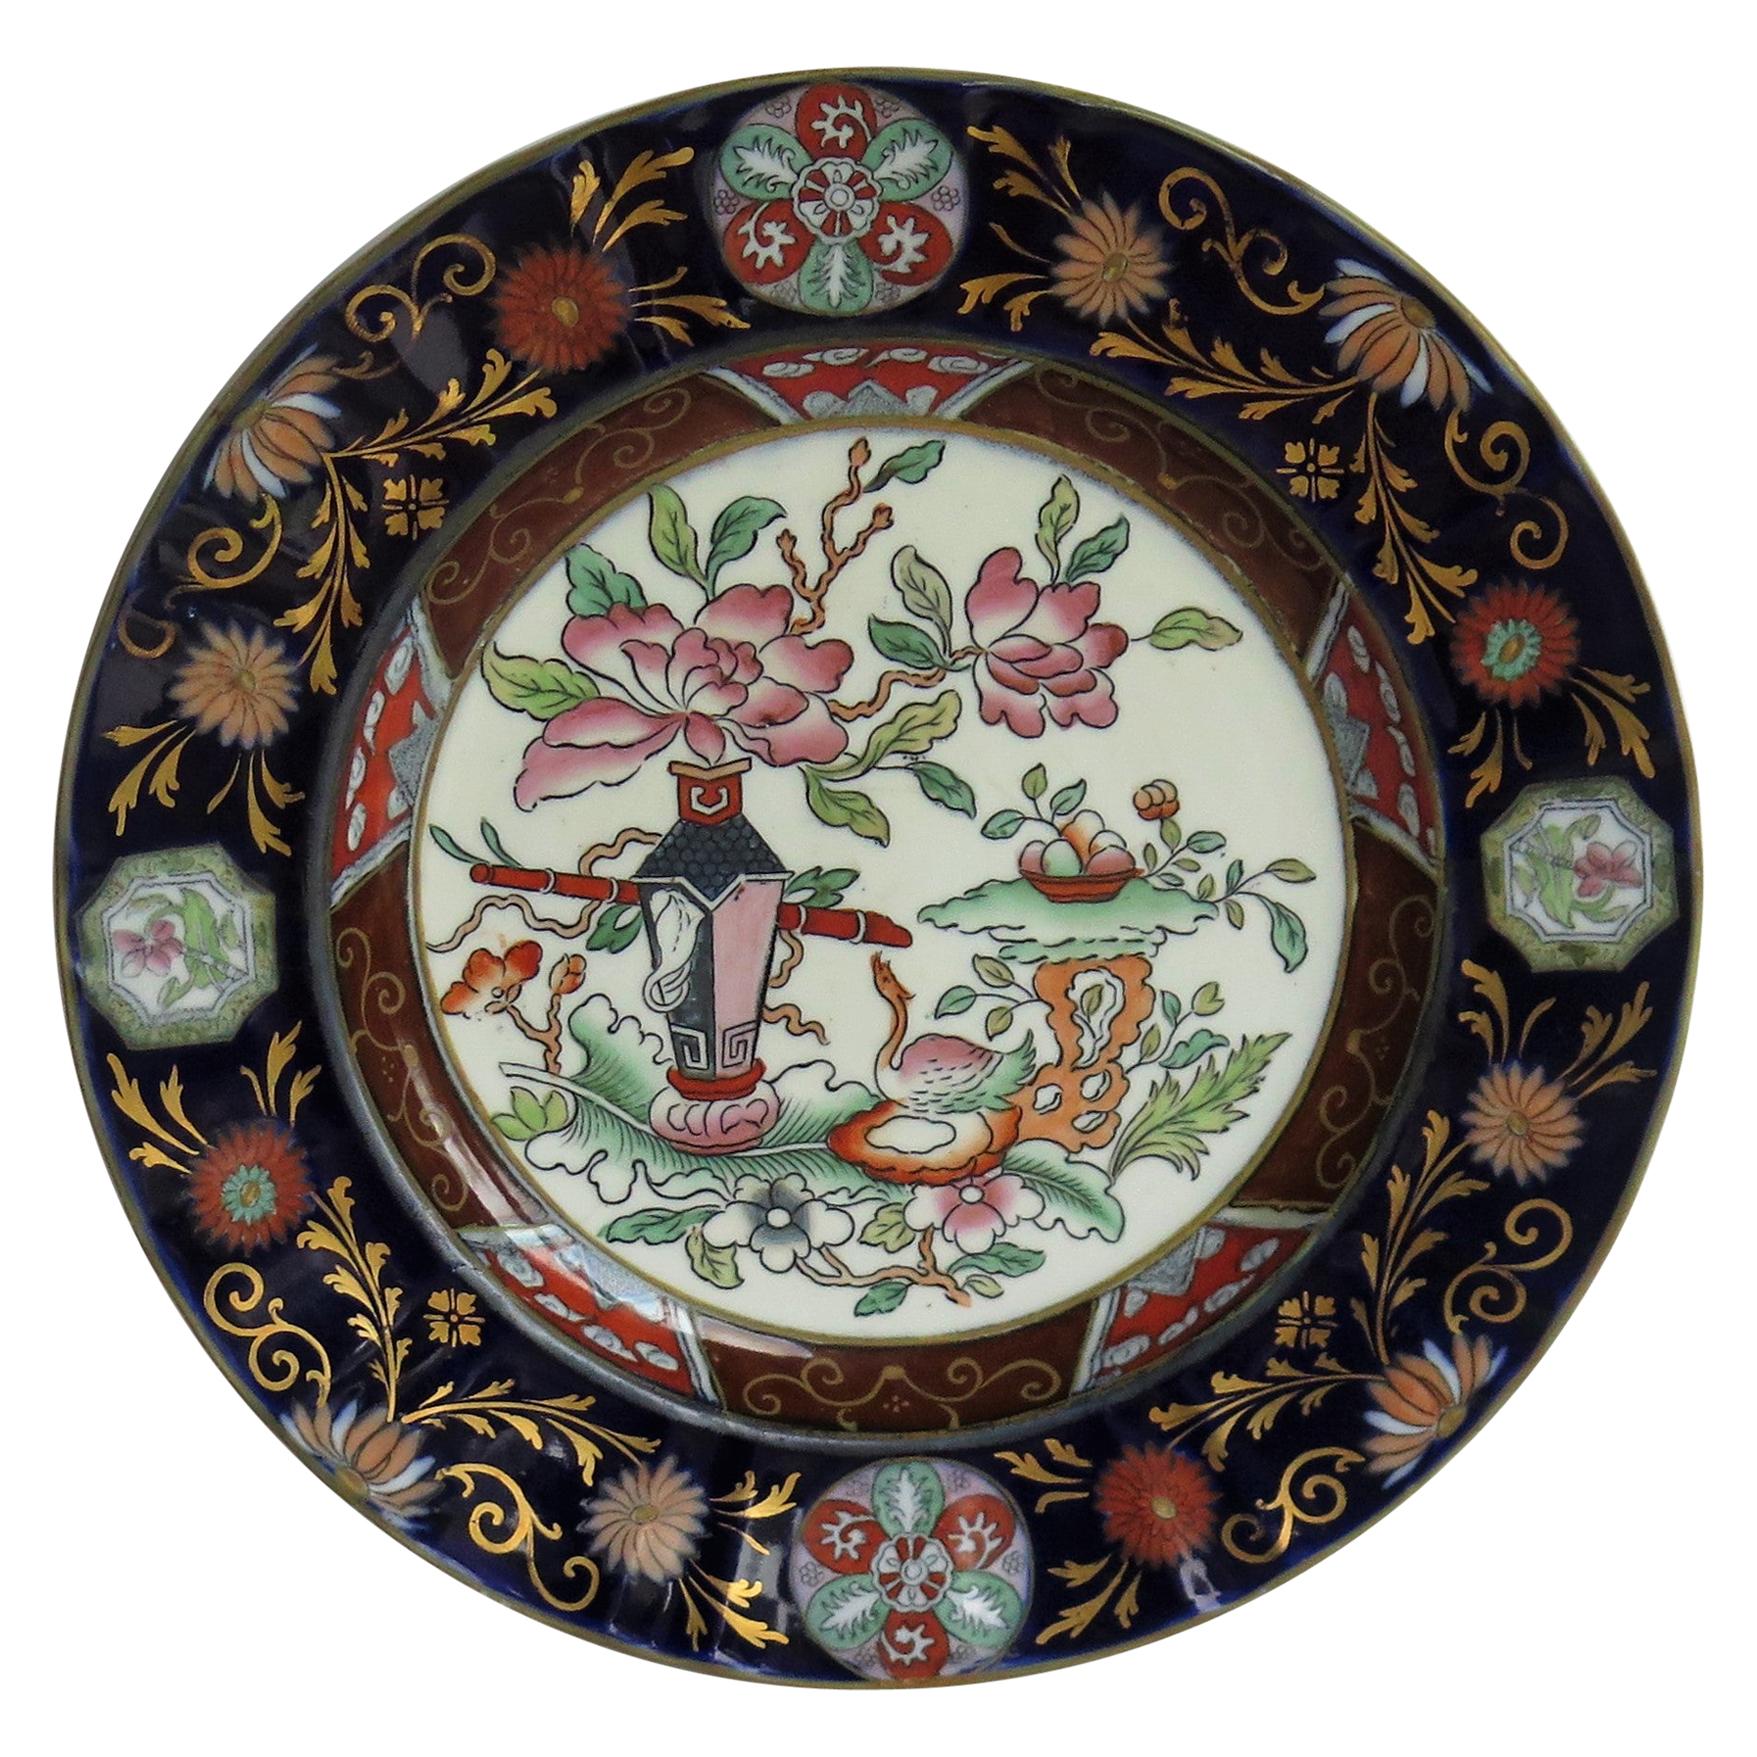 Masons' Ashworths Large Dinner Plate in Table and Flower Pot Pattern, circa 1875